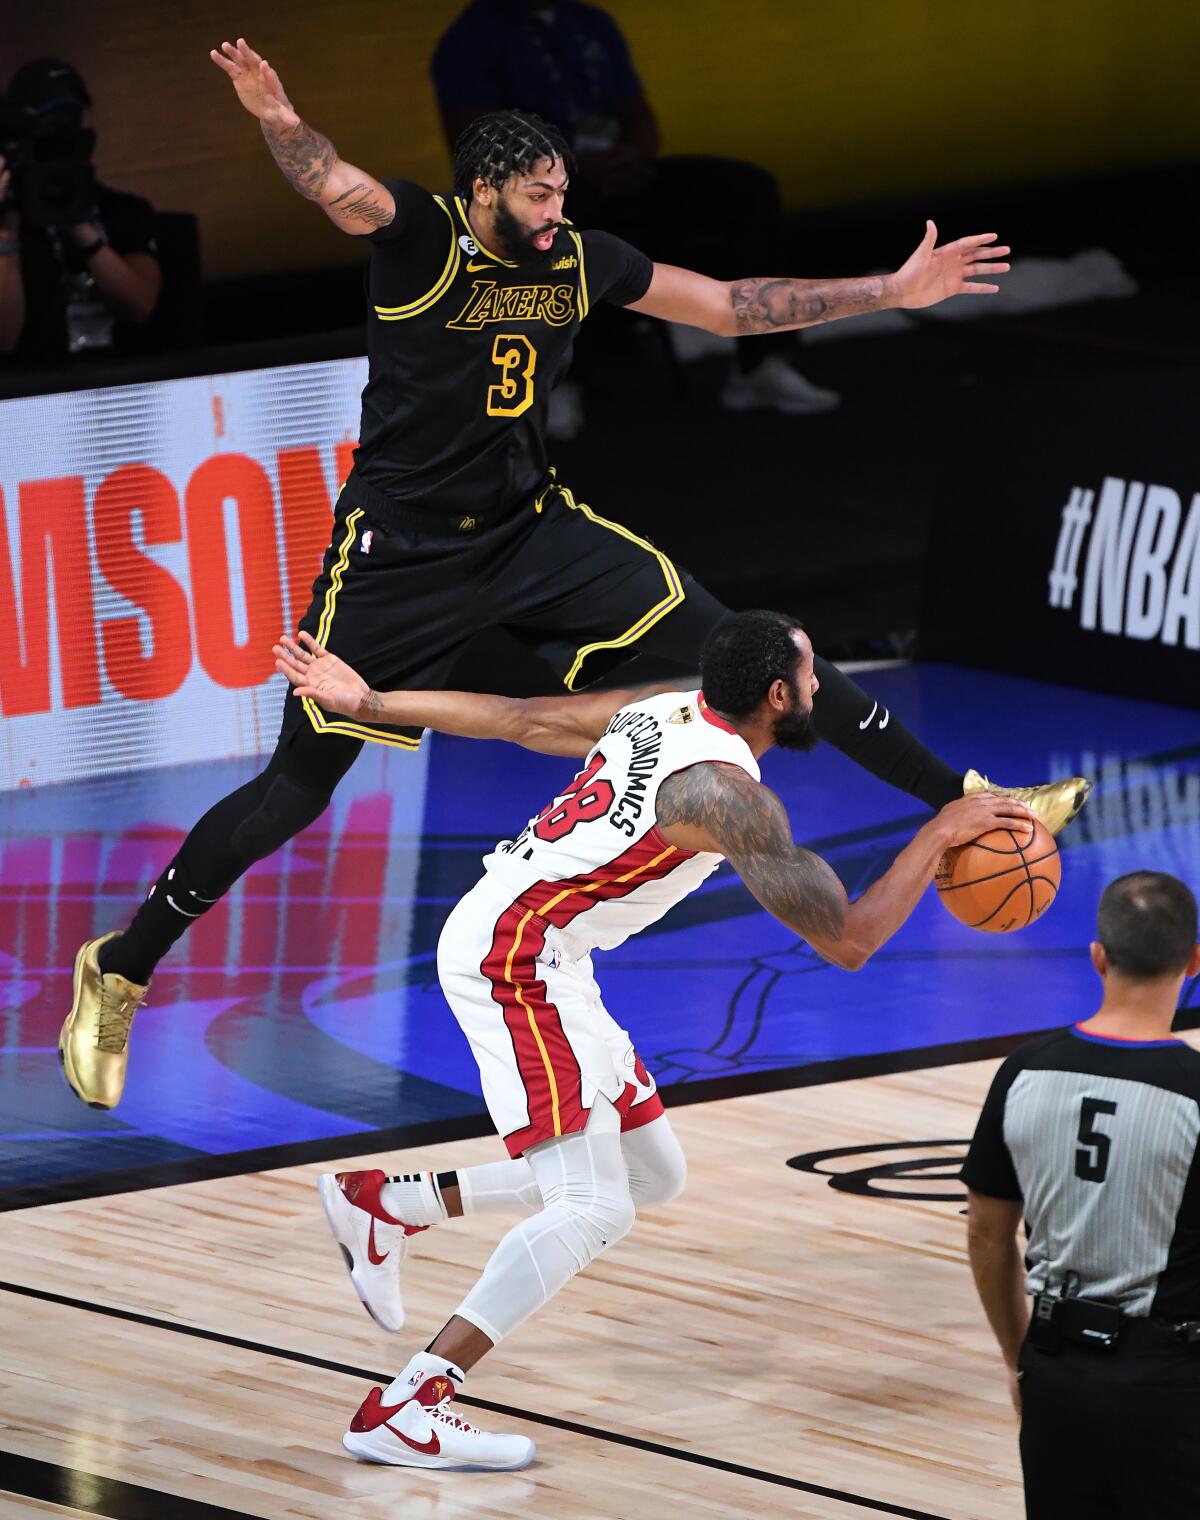 Lakers star Anthony Davis tries to defend Heat forward Andre Iguodala in Game 5 of the NBA Finals on Oct. 9 in Orlando, Fla.